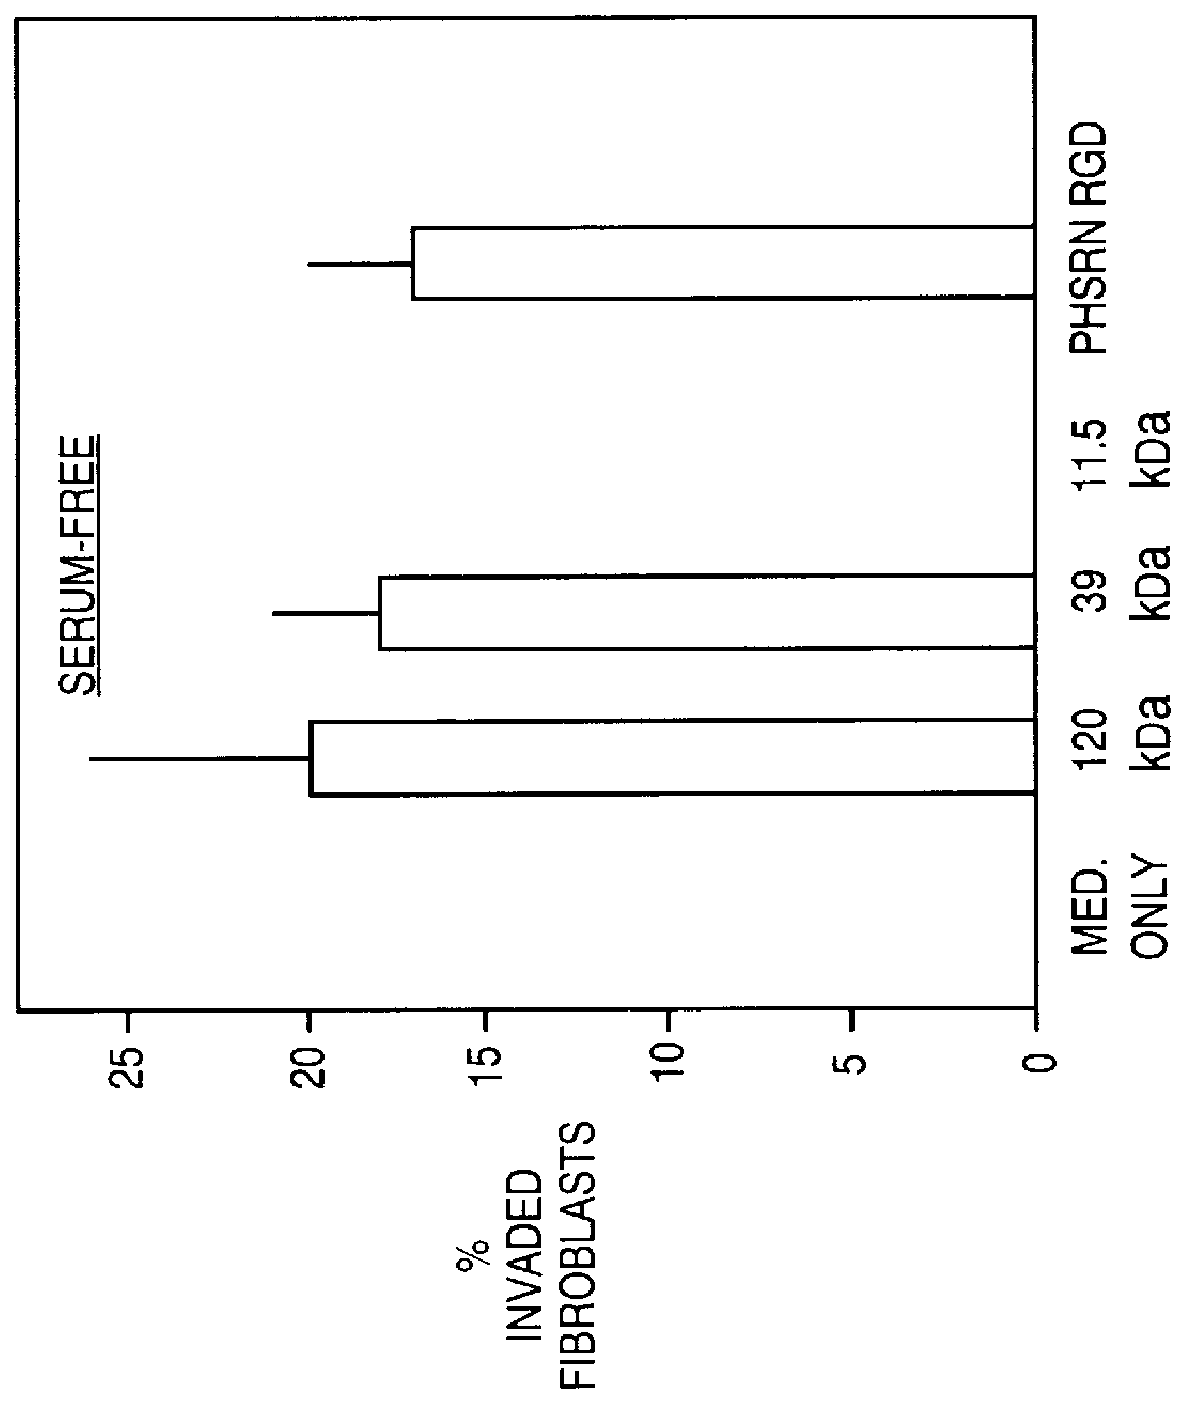 Protease resistant compositions for wound healing